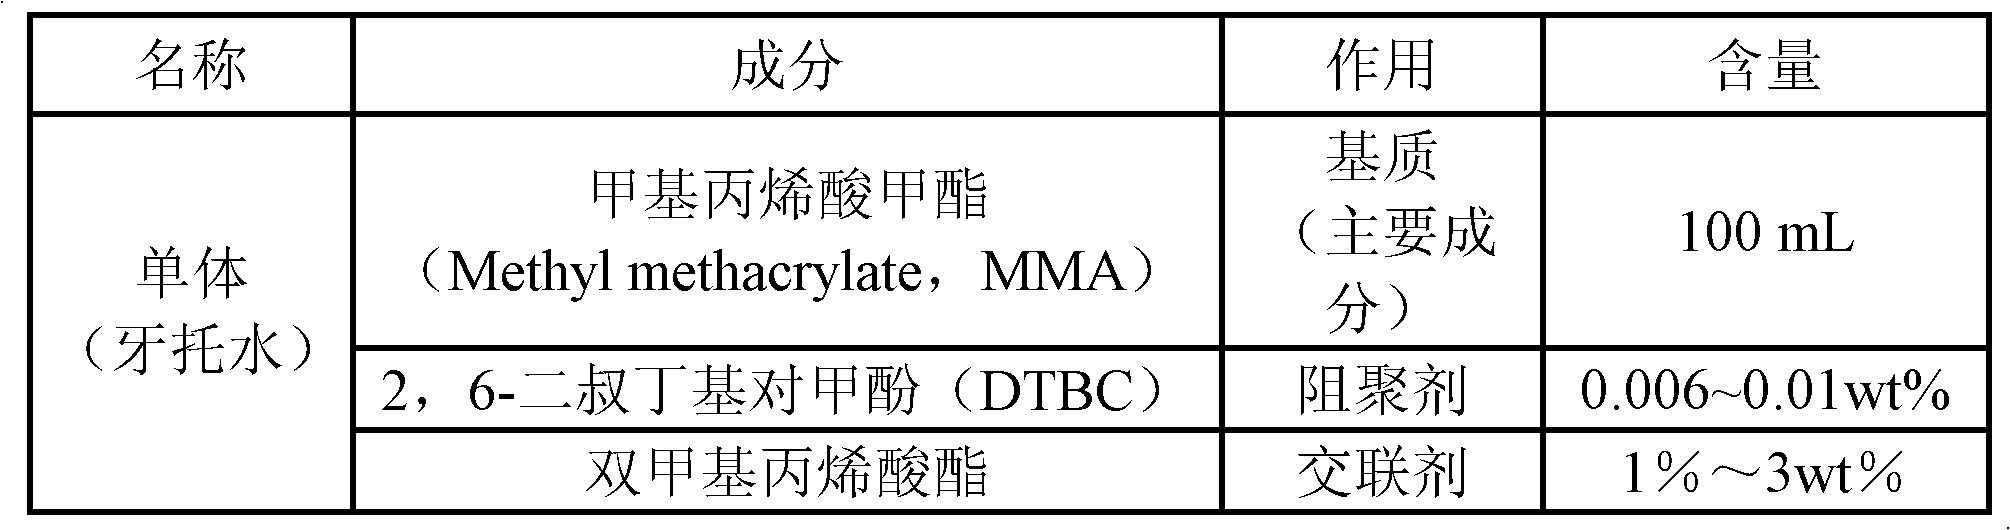 Butyl acrylate-methyl methacrylate copolymer based denture base material as well as preparation method and application thereof